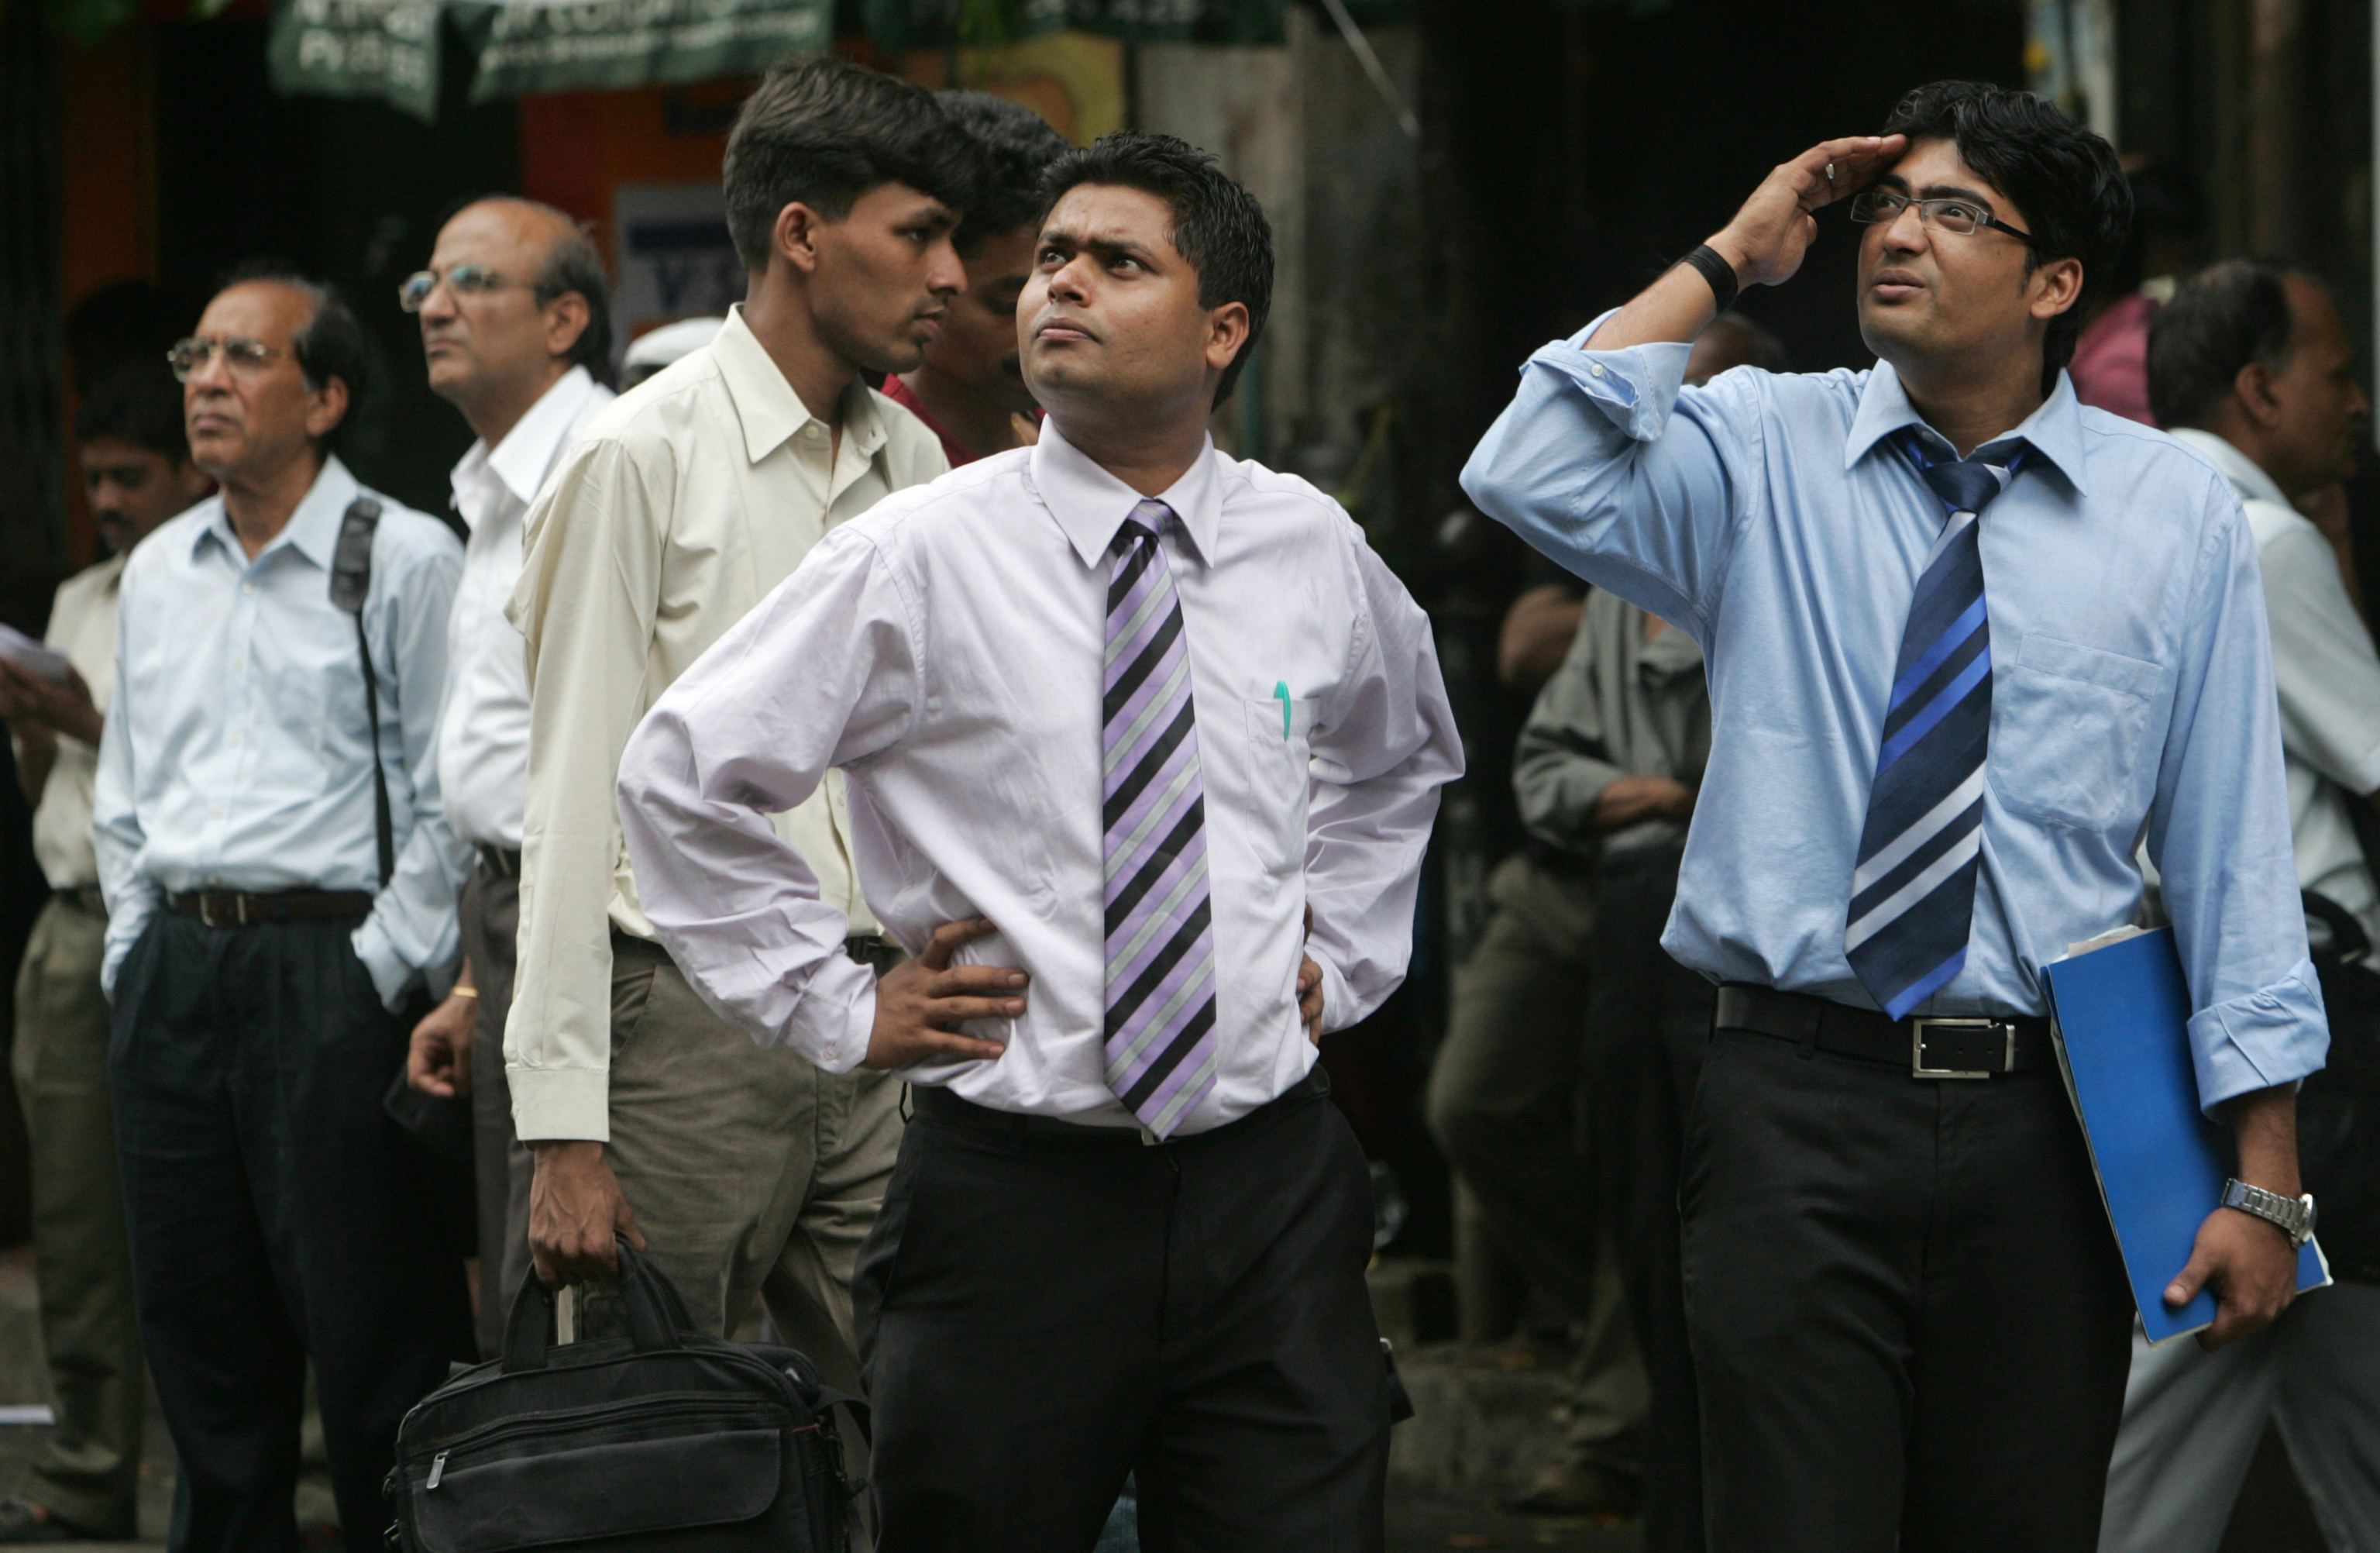 Passerby investors outside the Bombay Stock Exchange. India is hoping to attract more investment from Russia. Source: Getty Images